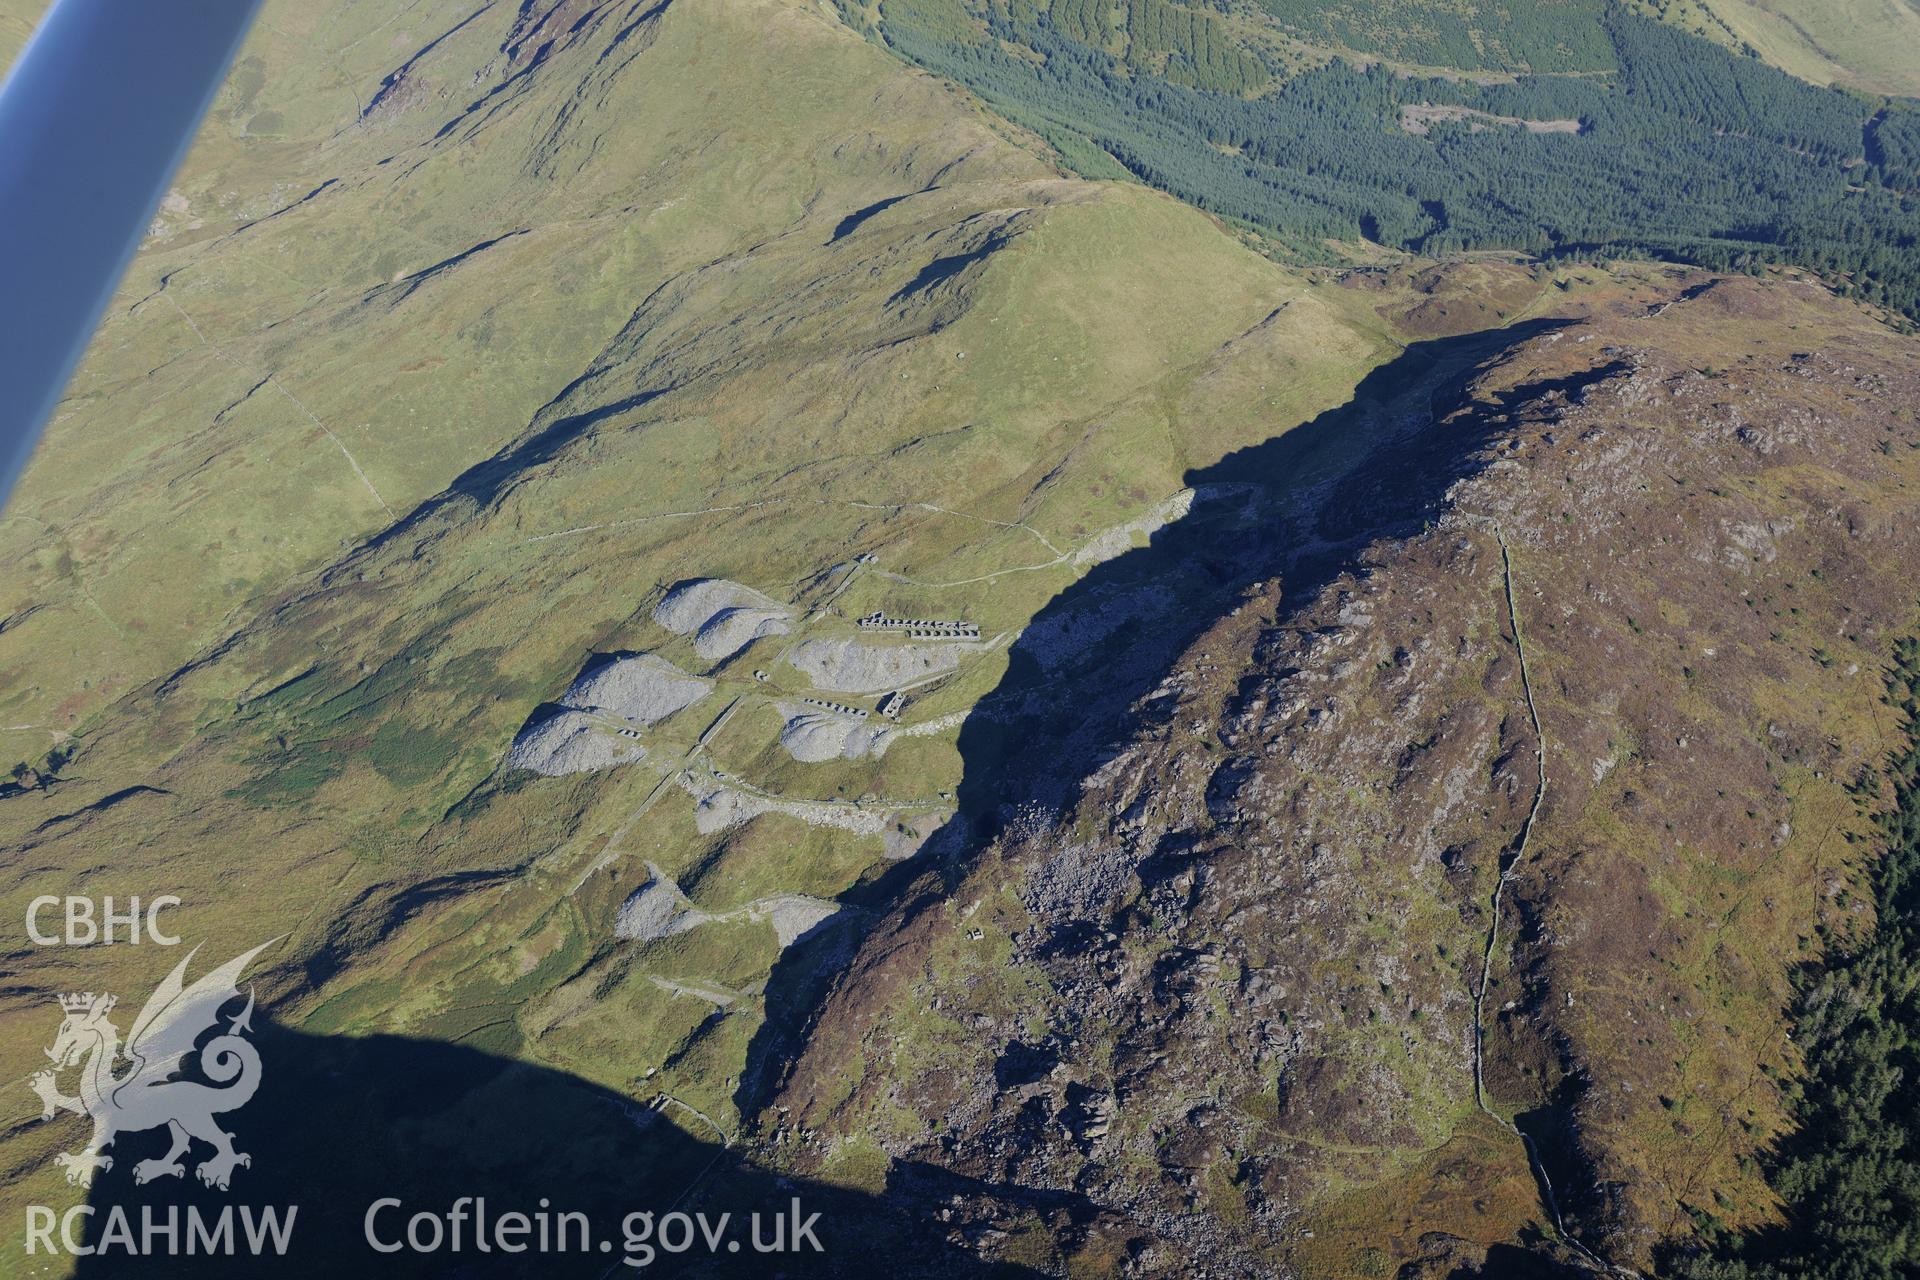 Workshop and barracks at Prince of Wales slate mine, near Beddgelert. Oblique aerial photograph taken during the Royal Commission's programme of archaeological aerial reconnaissance by Toby Driver on 2nd October 2015.